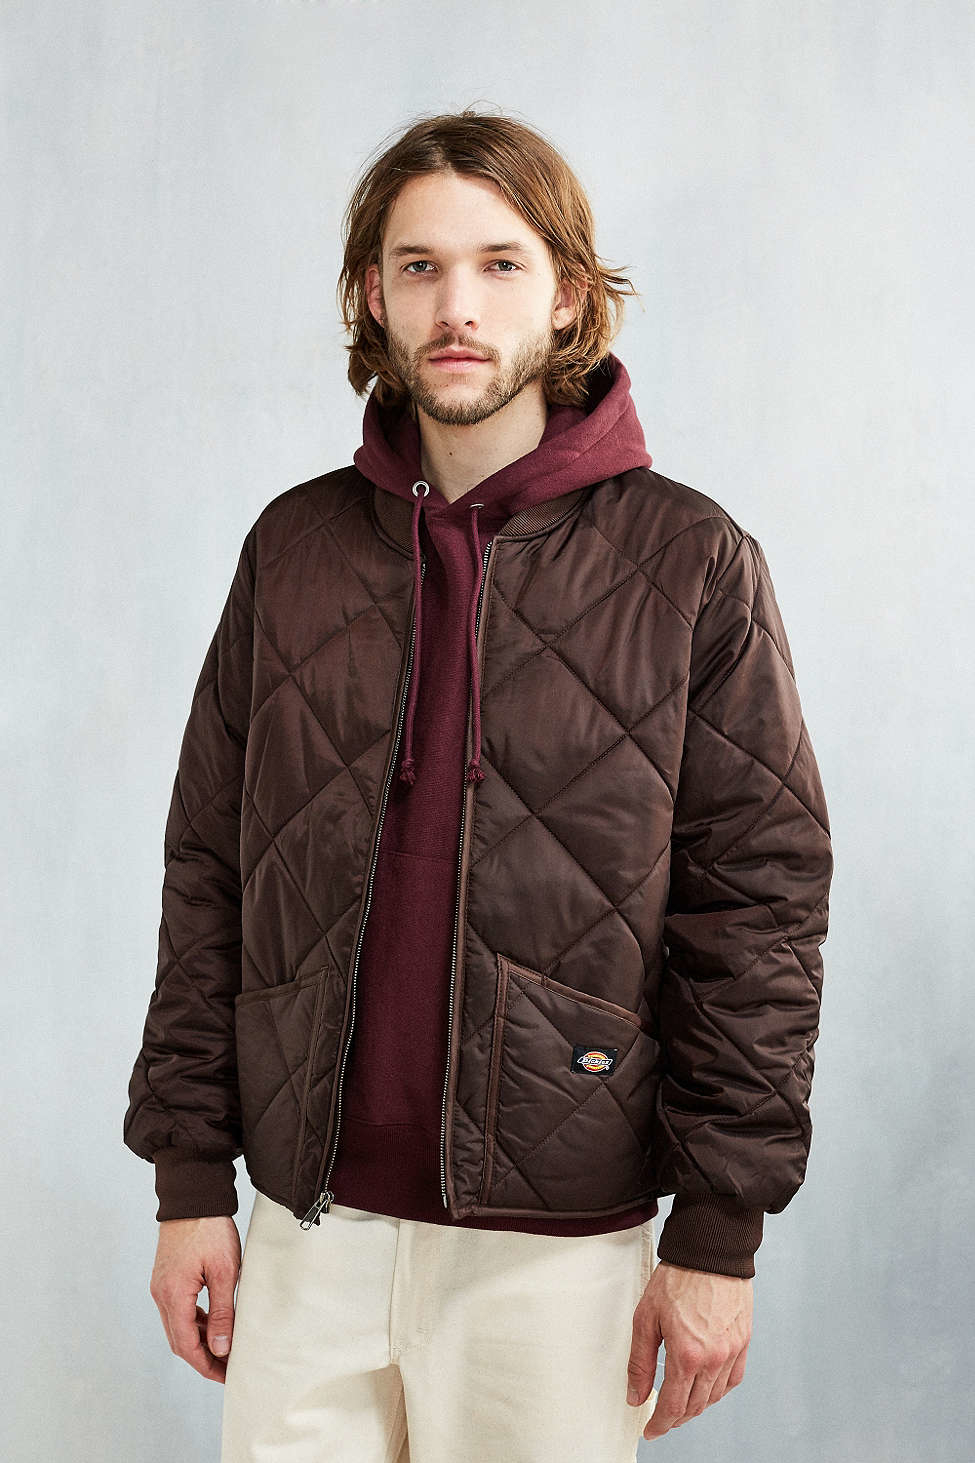 Dickies Synthetic Diamond Quilted Jacket in Chocolate (Brown) for Men - Lyst